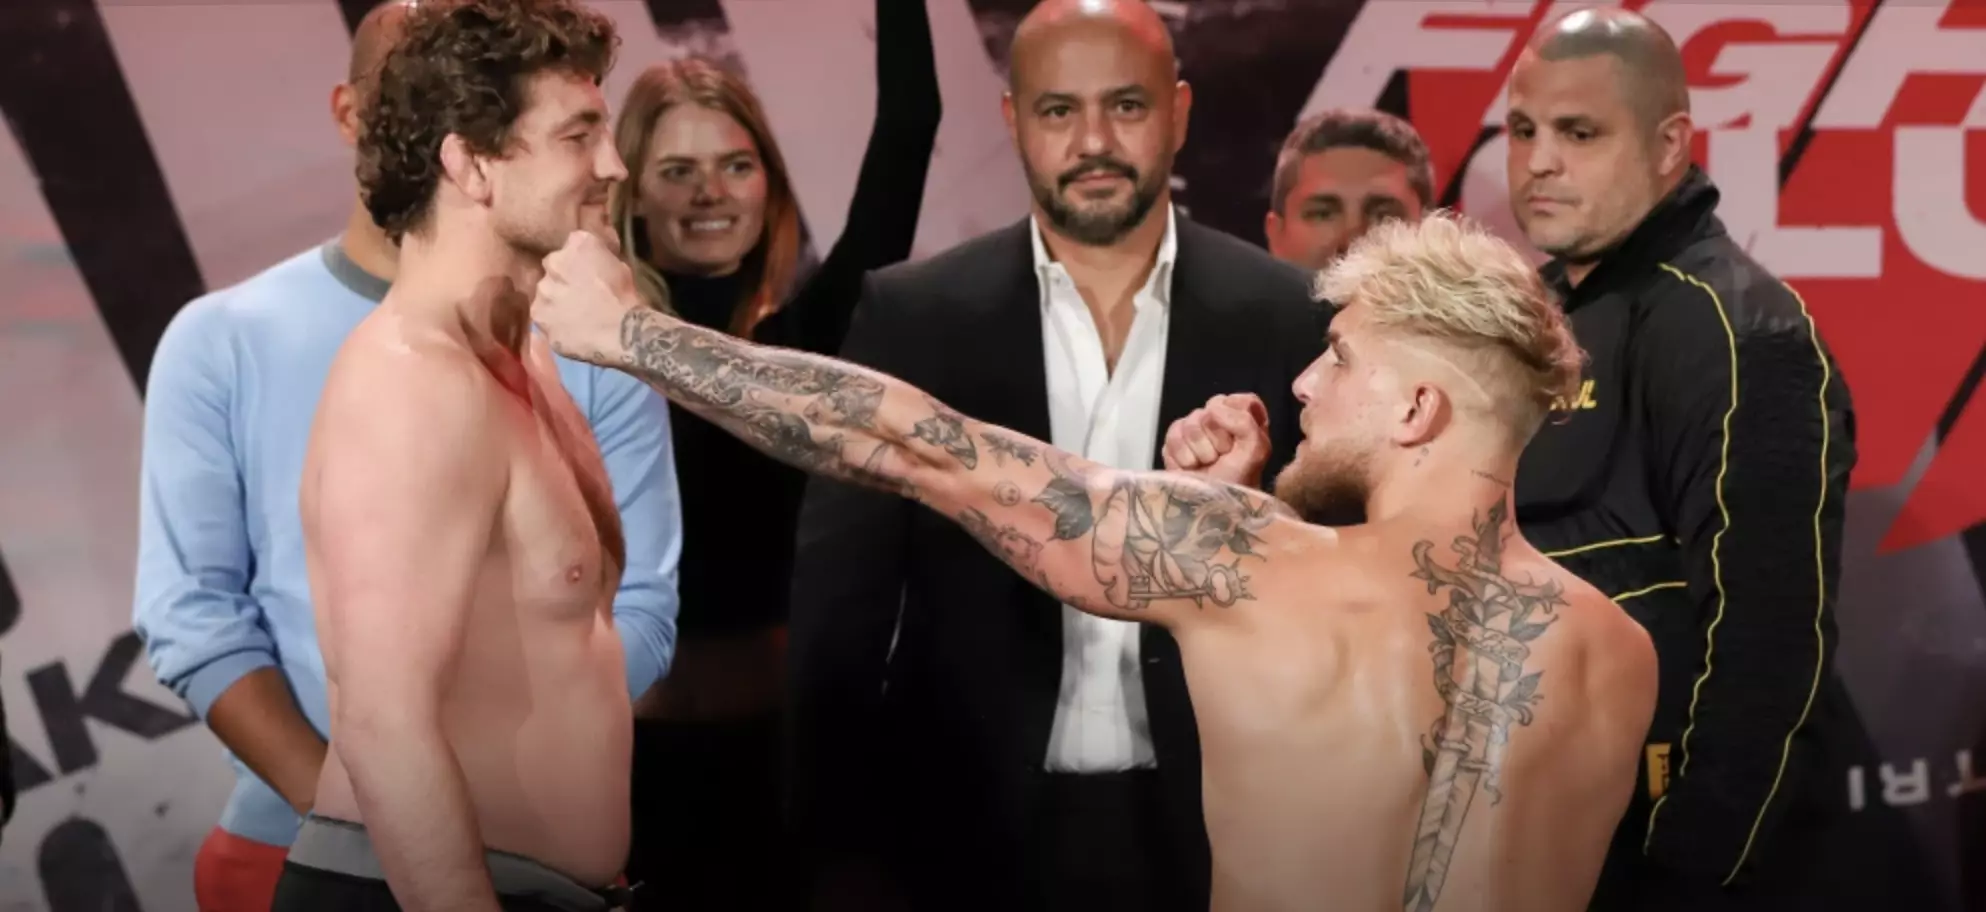 Jake Paul sensationally knocked out former UFC welterweight Ben Askren in the first round of an exhibition fight